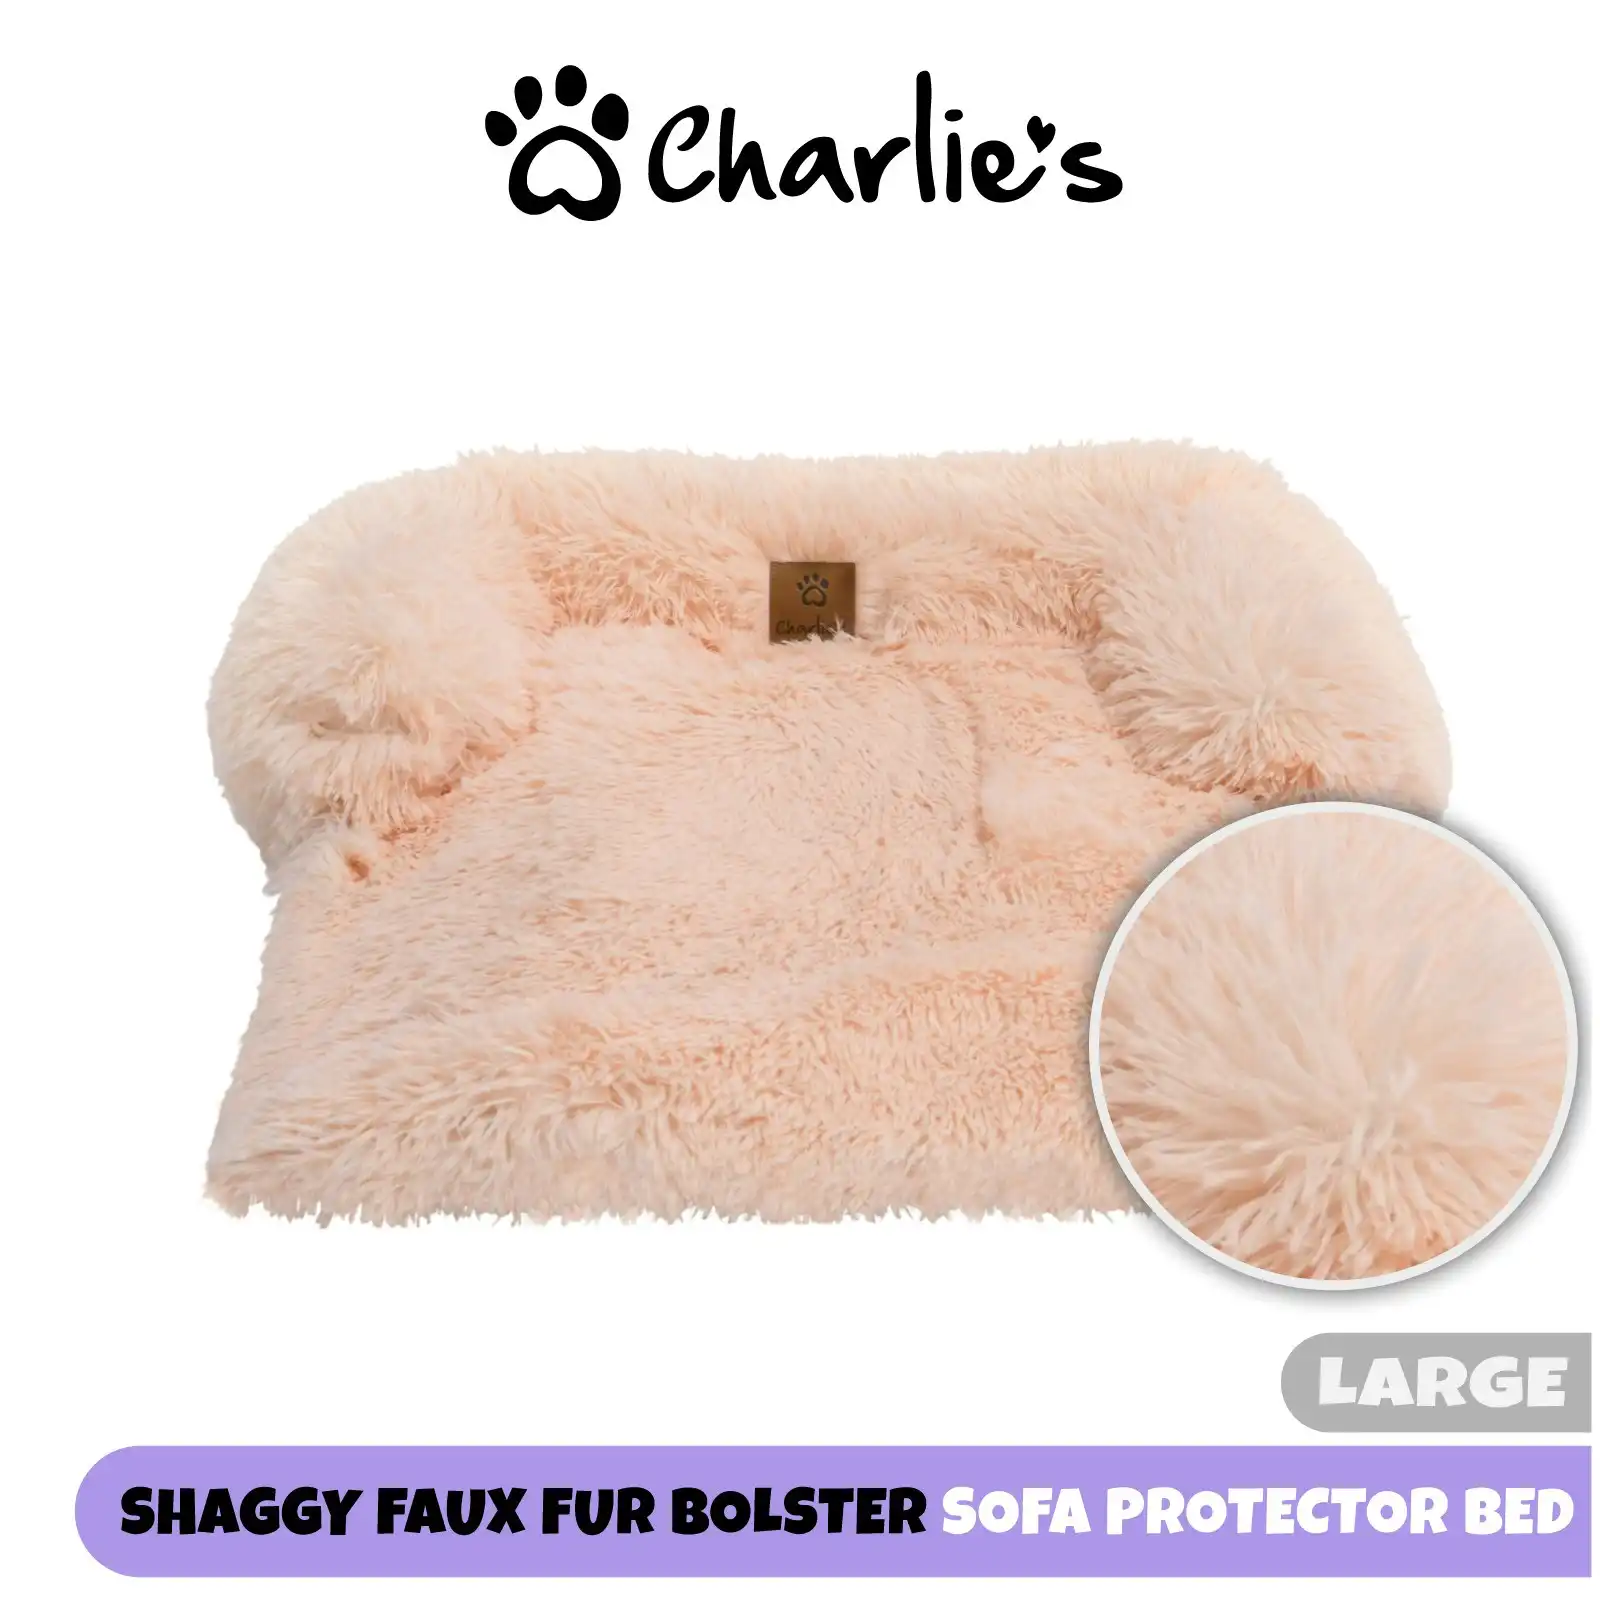 Charlie's Shaggy Faux Fur Bolster Sofa Protector Calming Dog Bed Soft Beige Large